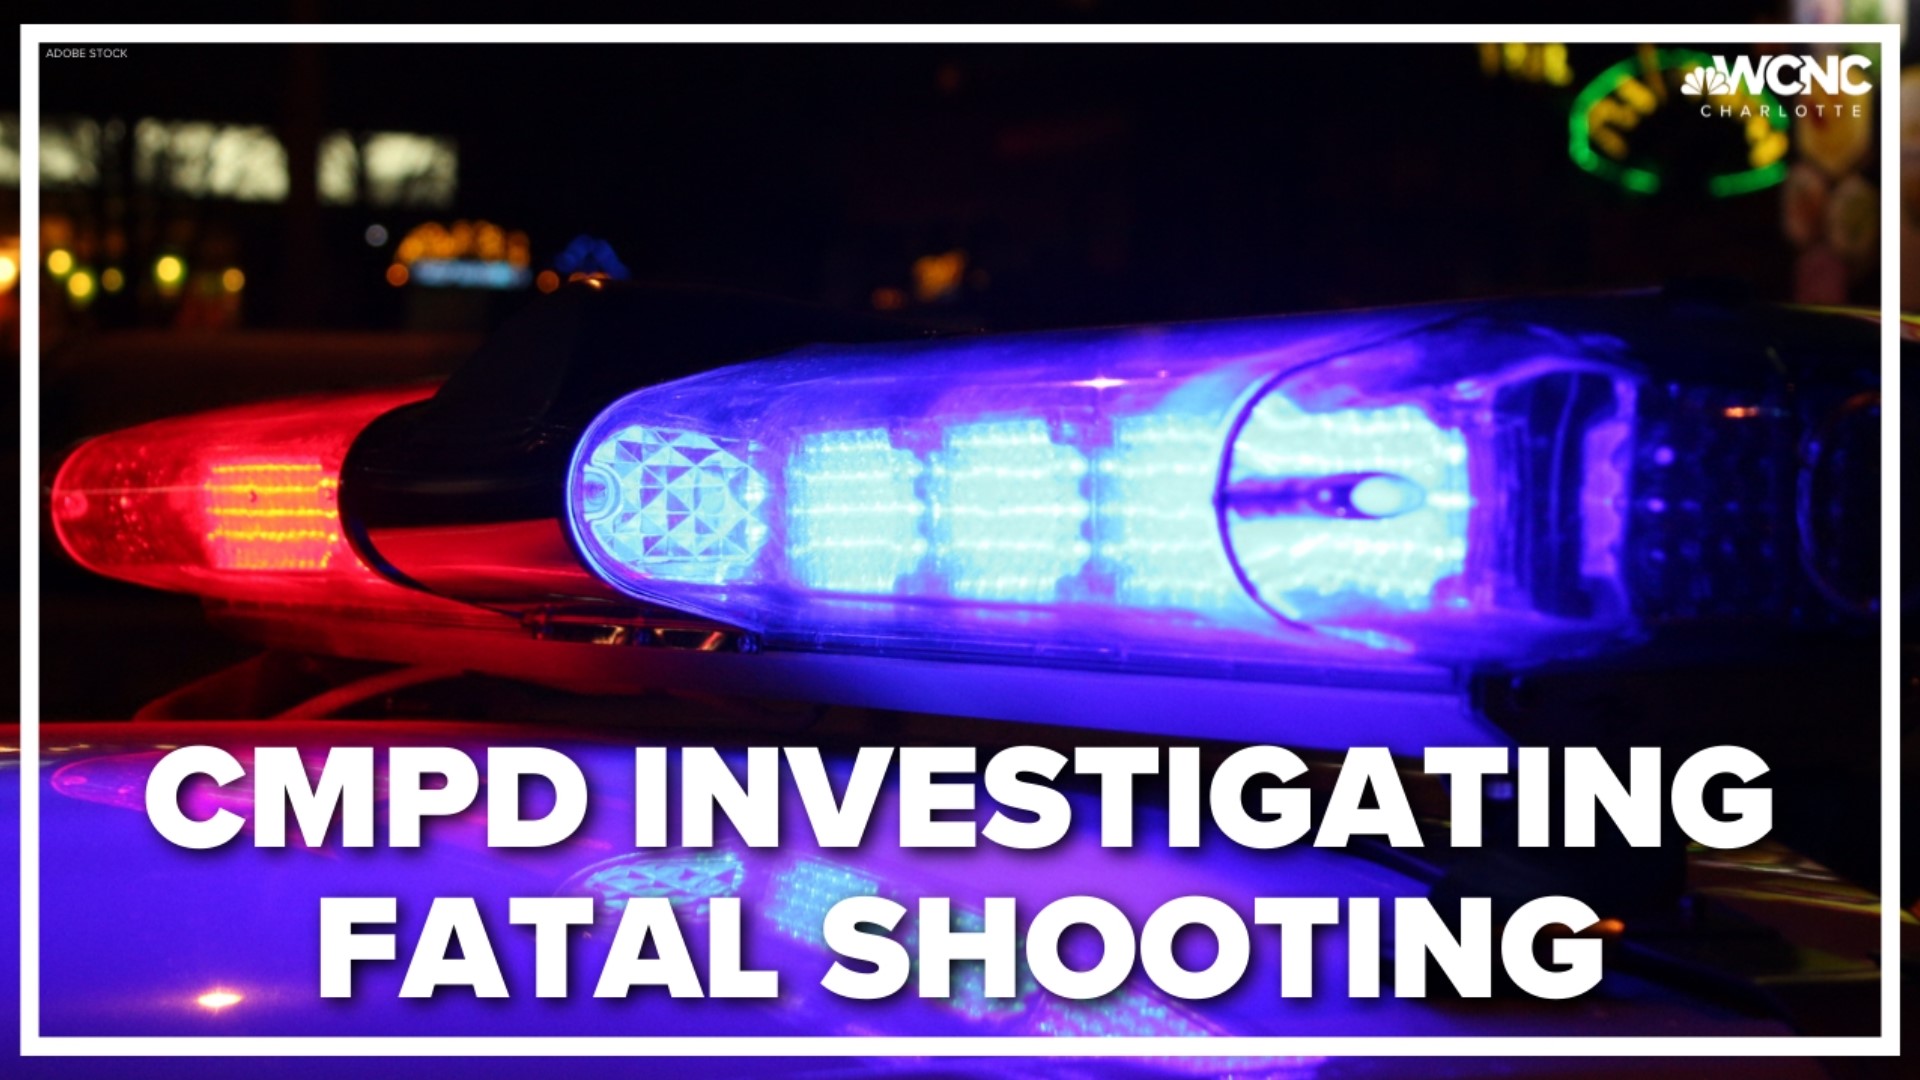 CMPD is investigating a homicide in the 6000 block of Bennetsville lane.